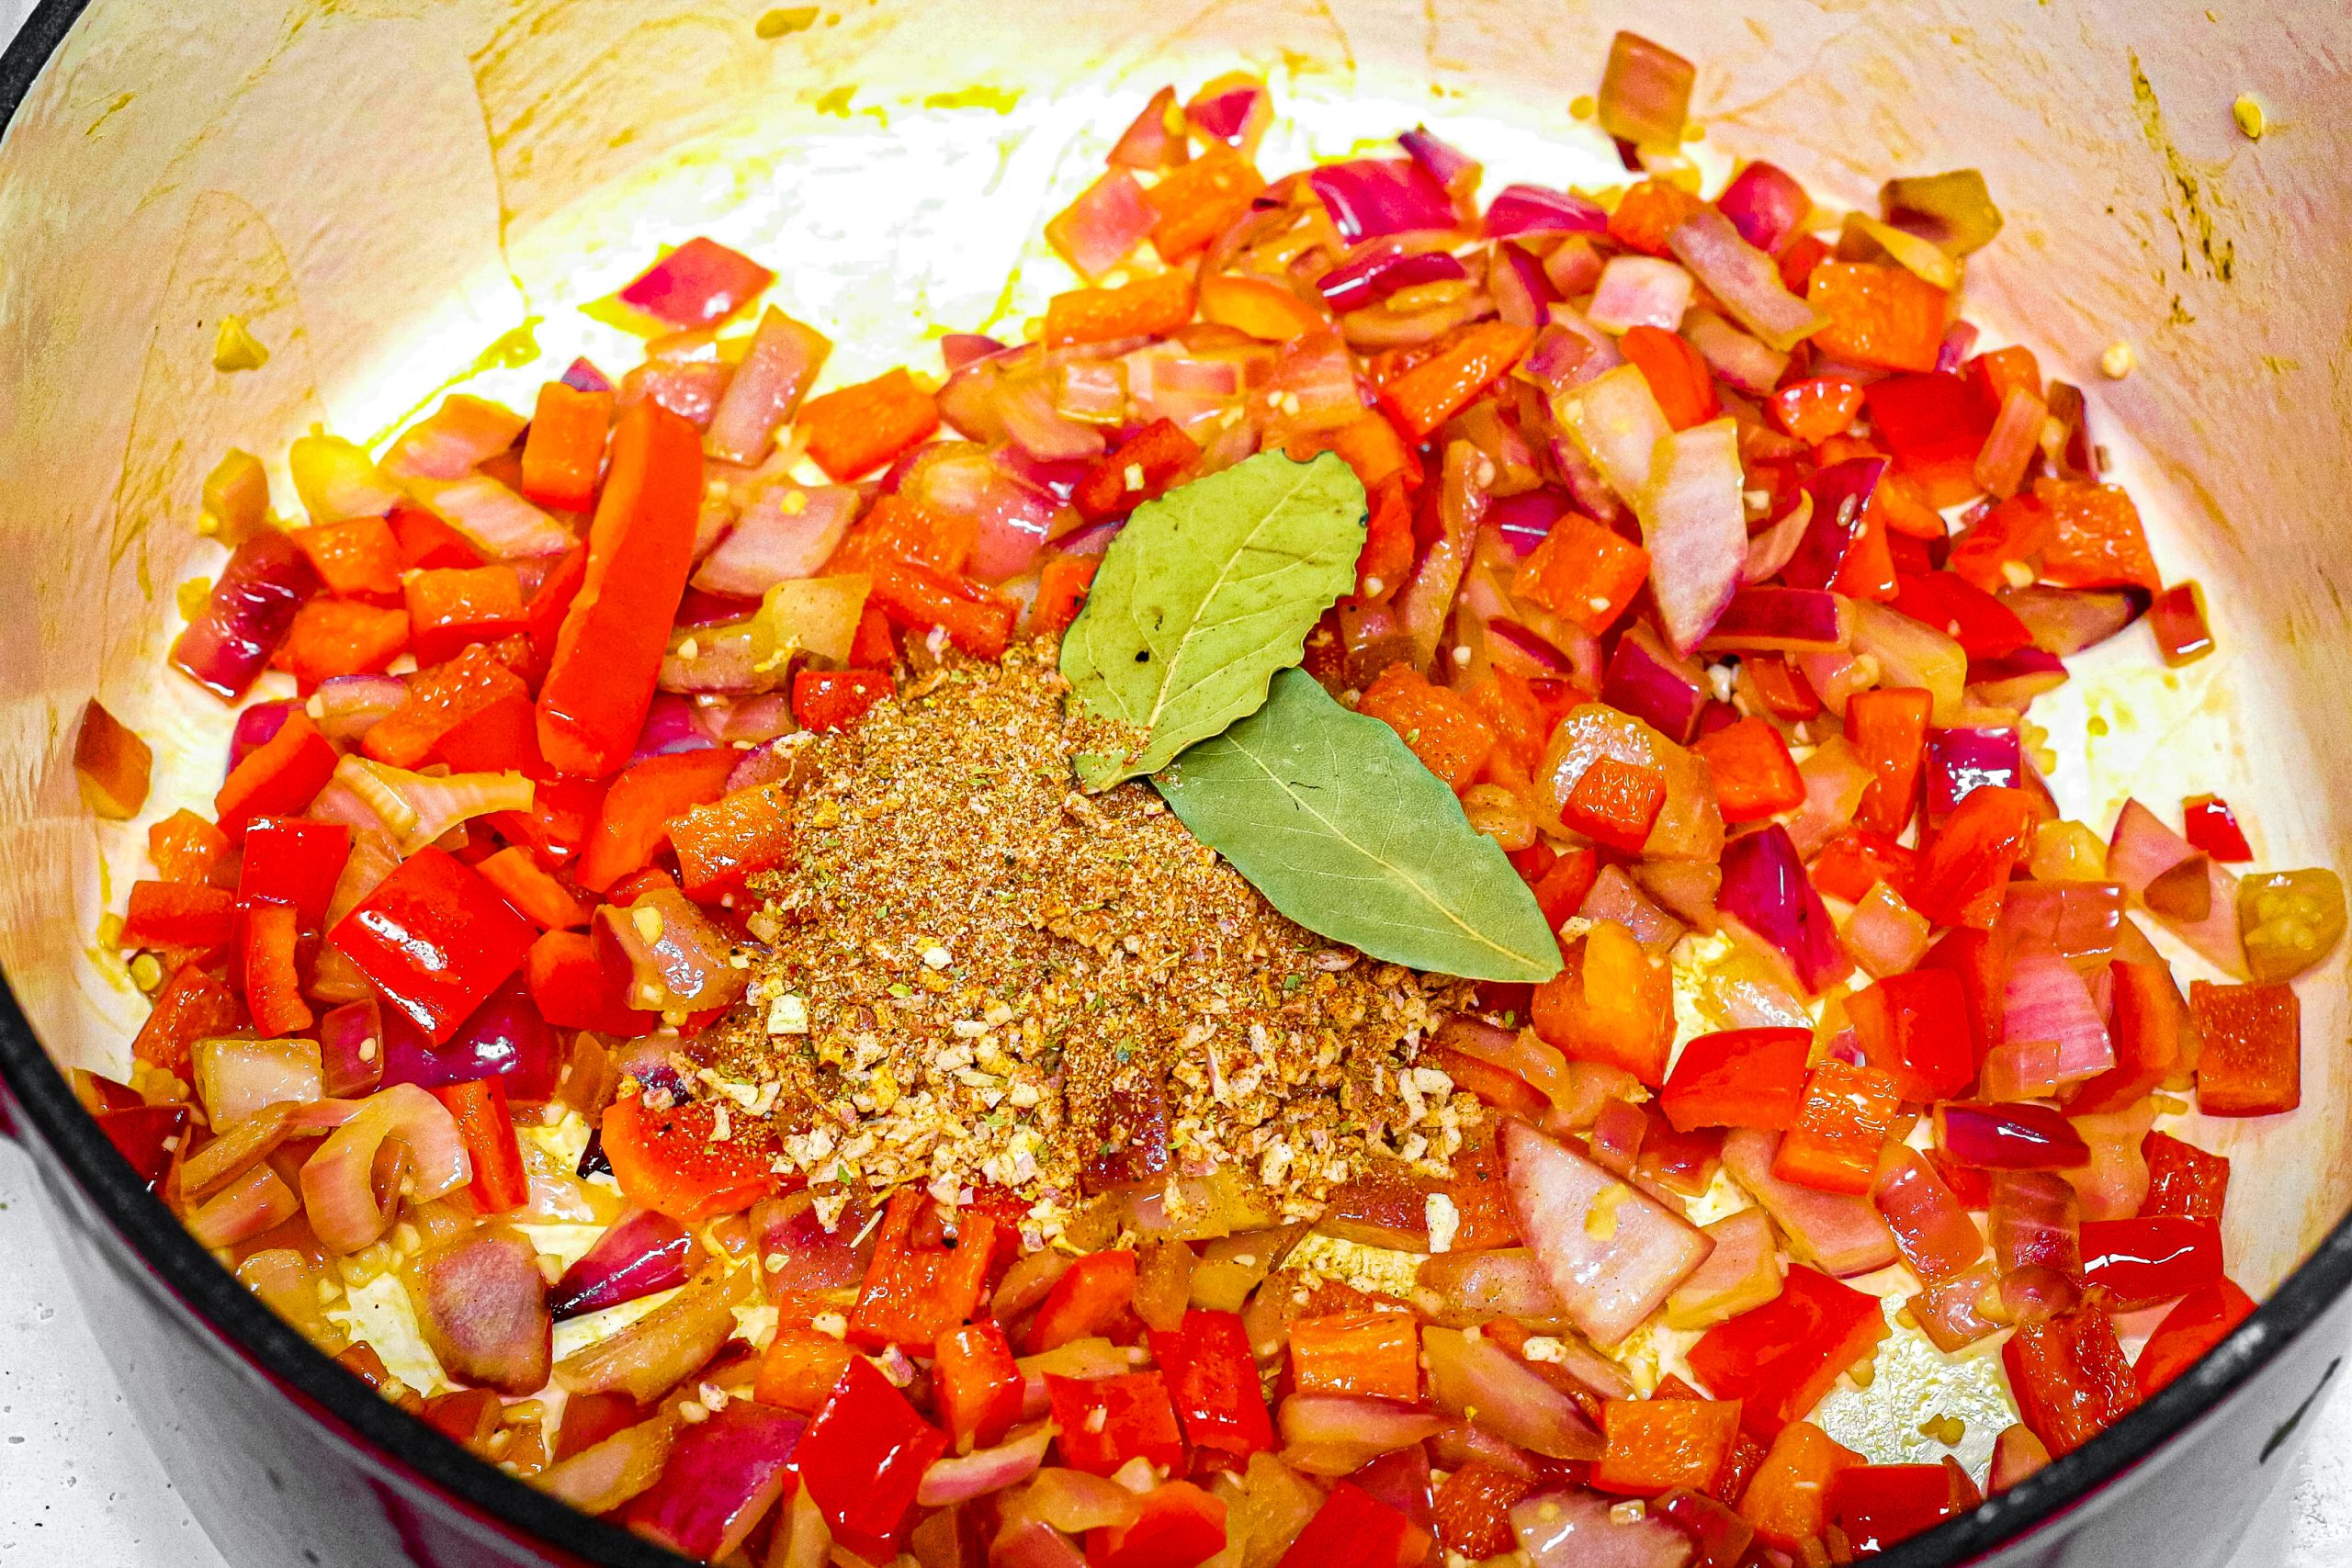 Add the mixed spice ingredients, sauteing for 30 seconds.